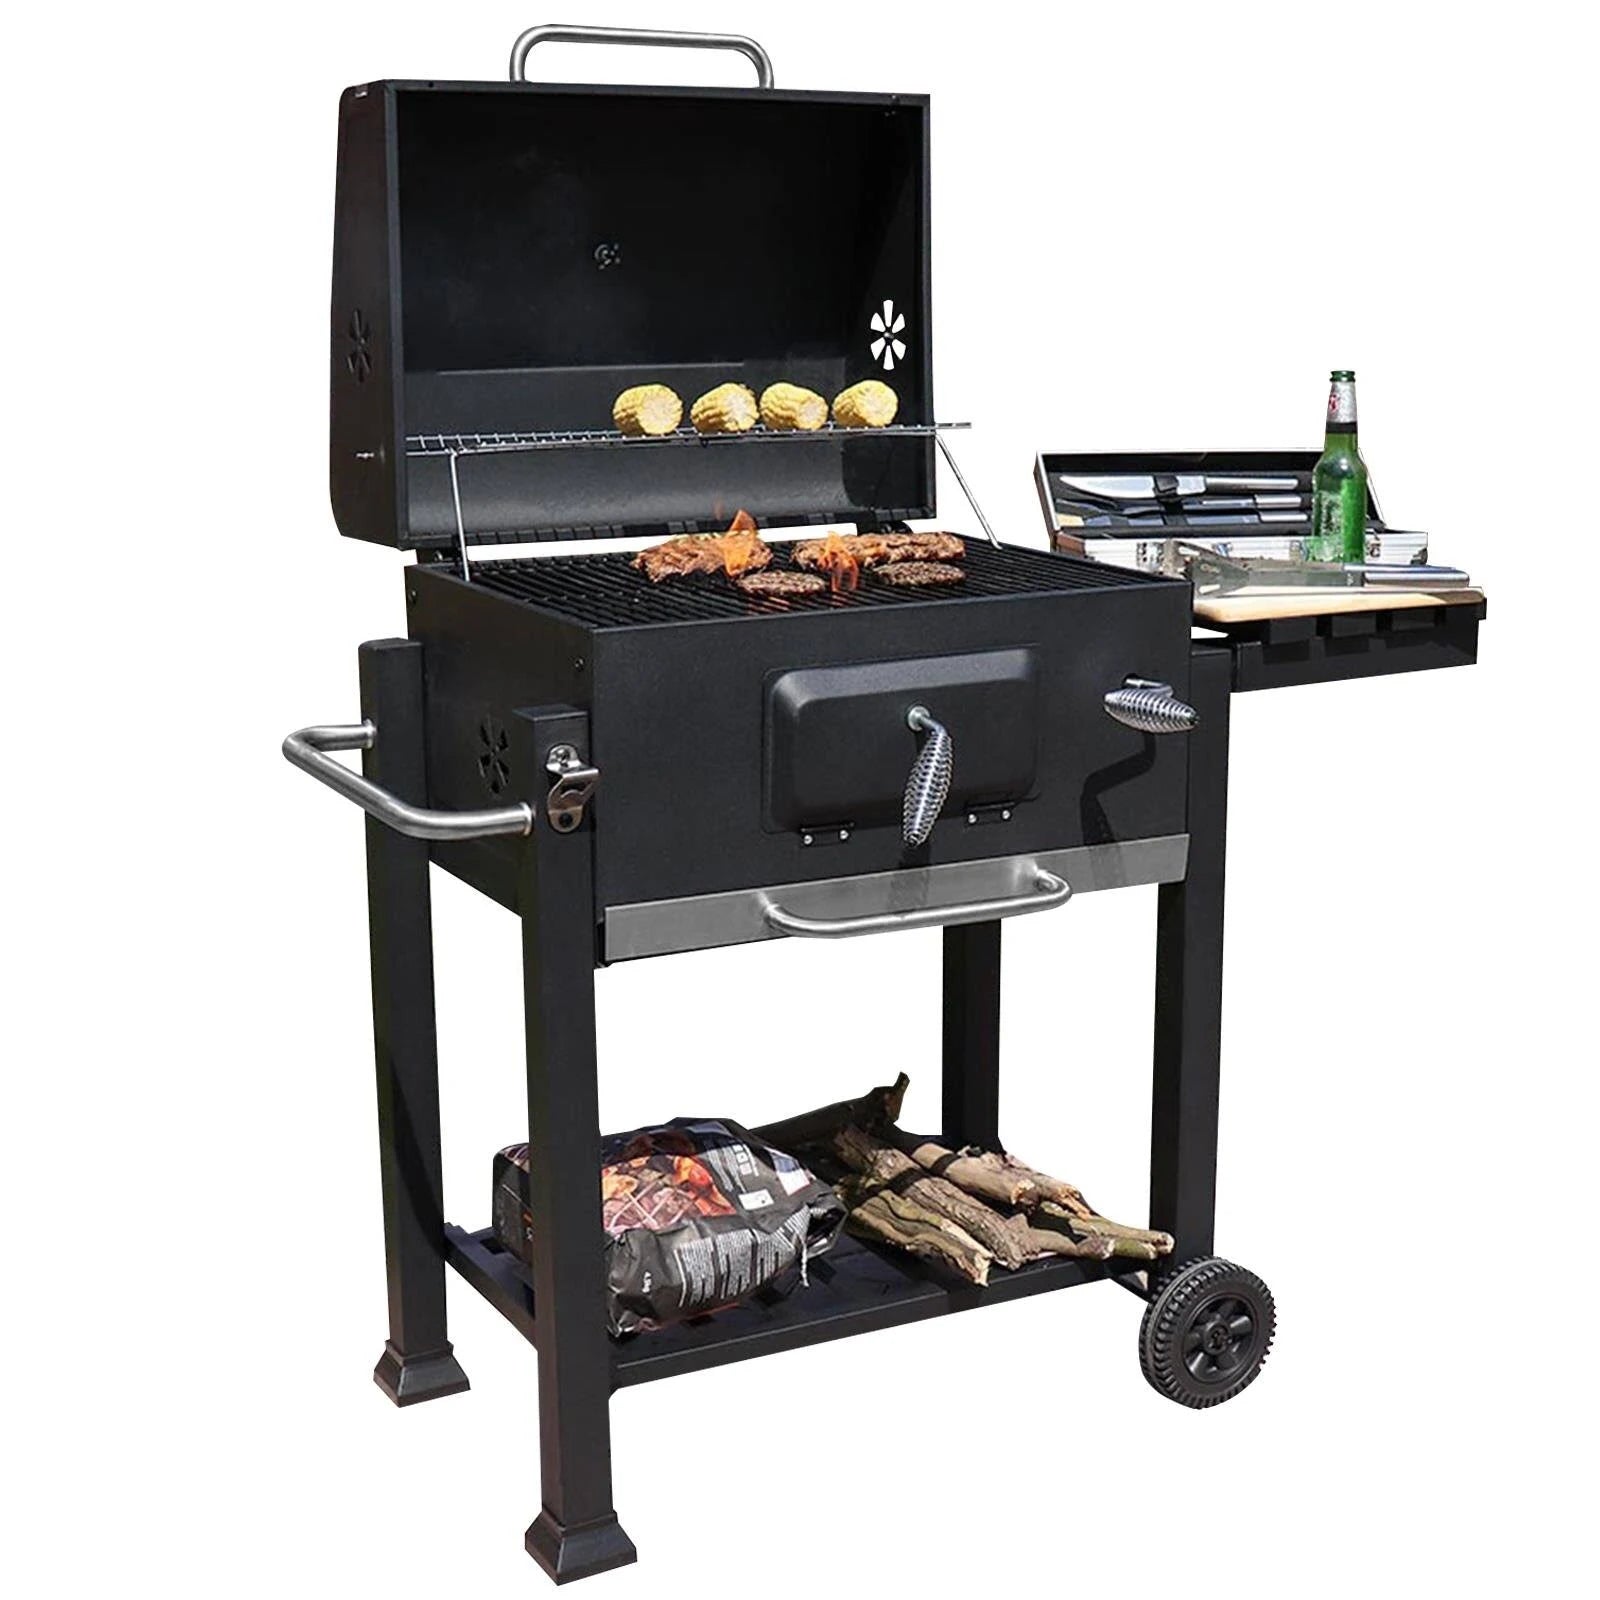 Outdoor Garden Smoker BBQ with Warming Rack and Side Shelf and Wheels